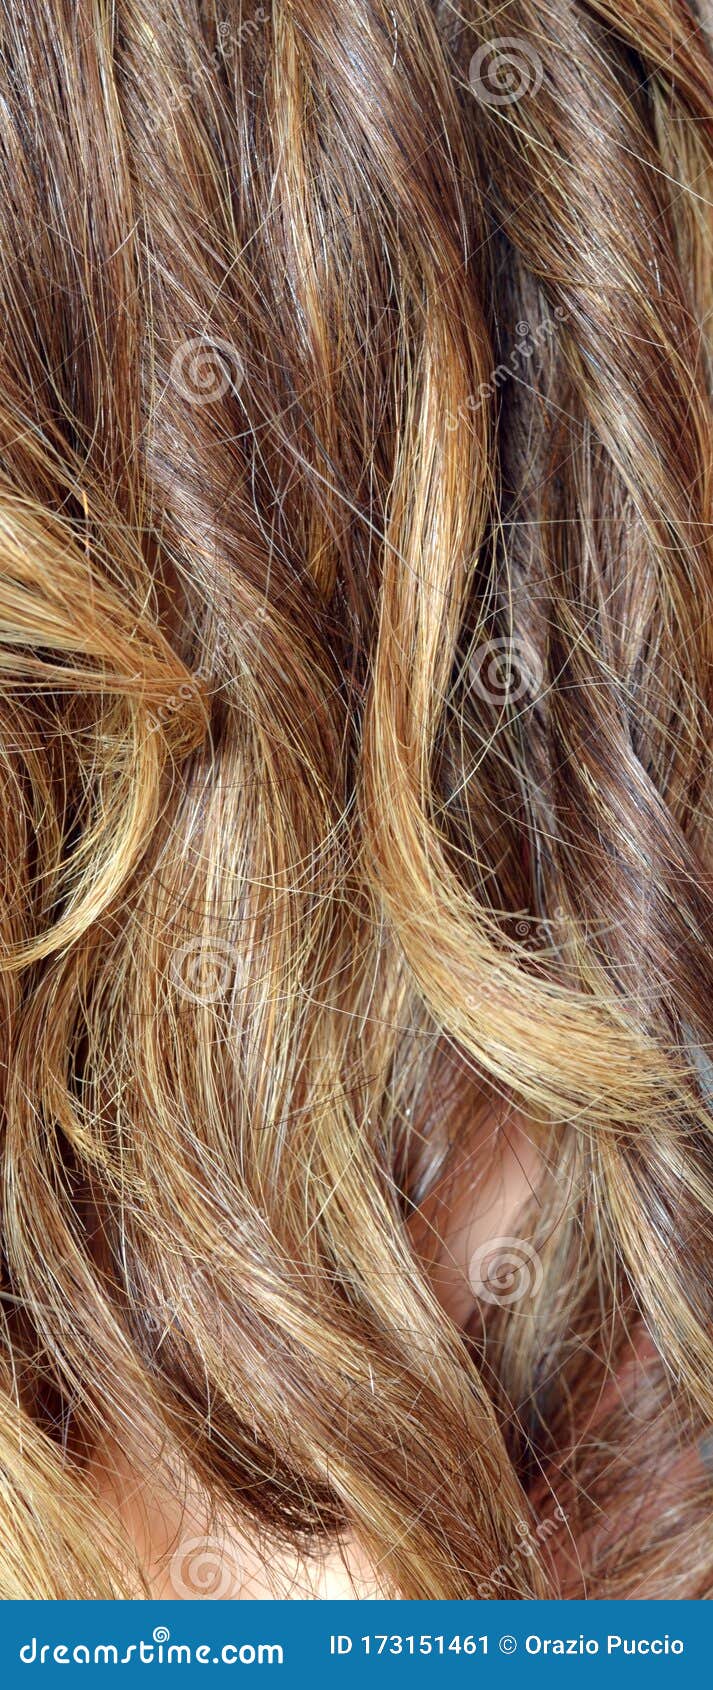 Close Up Pictures of Golden Blonde Hair Stock Image - Image of females, hair:  173151461